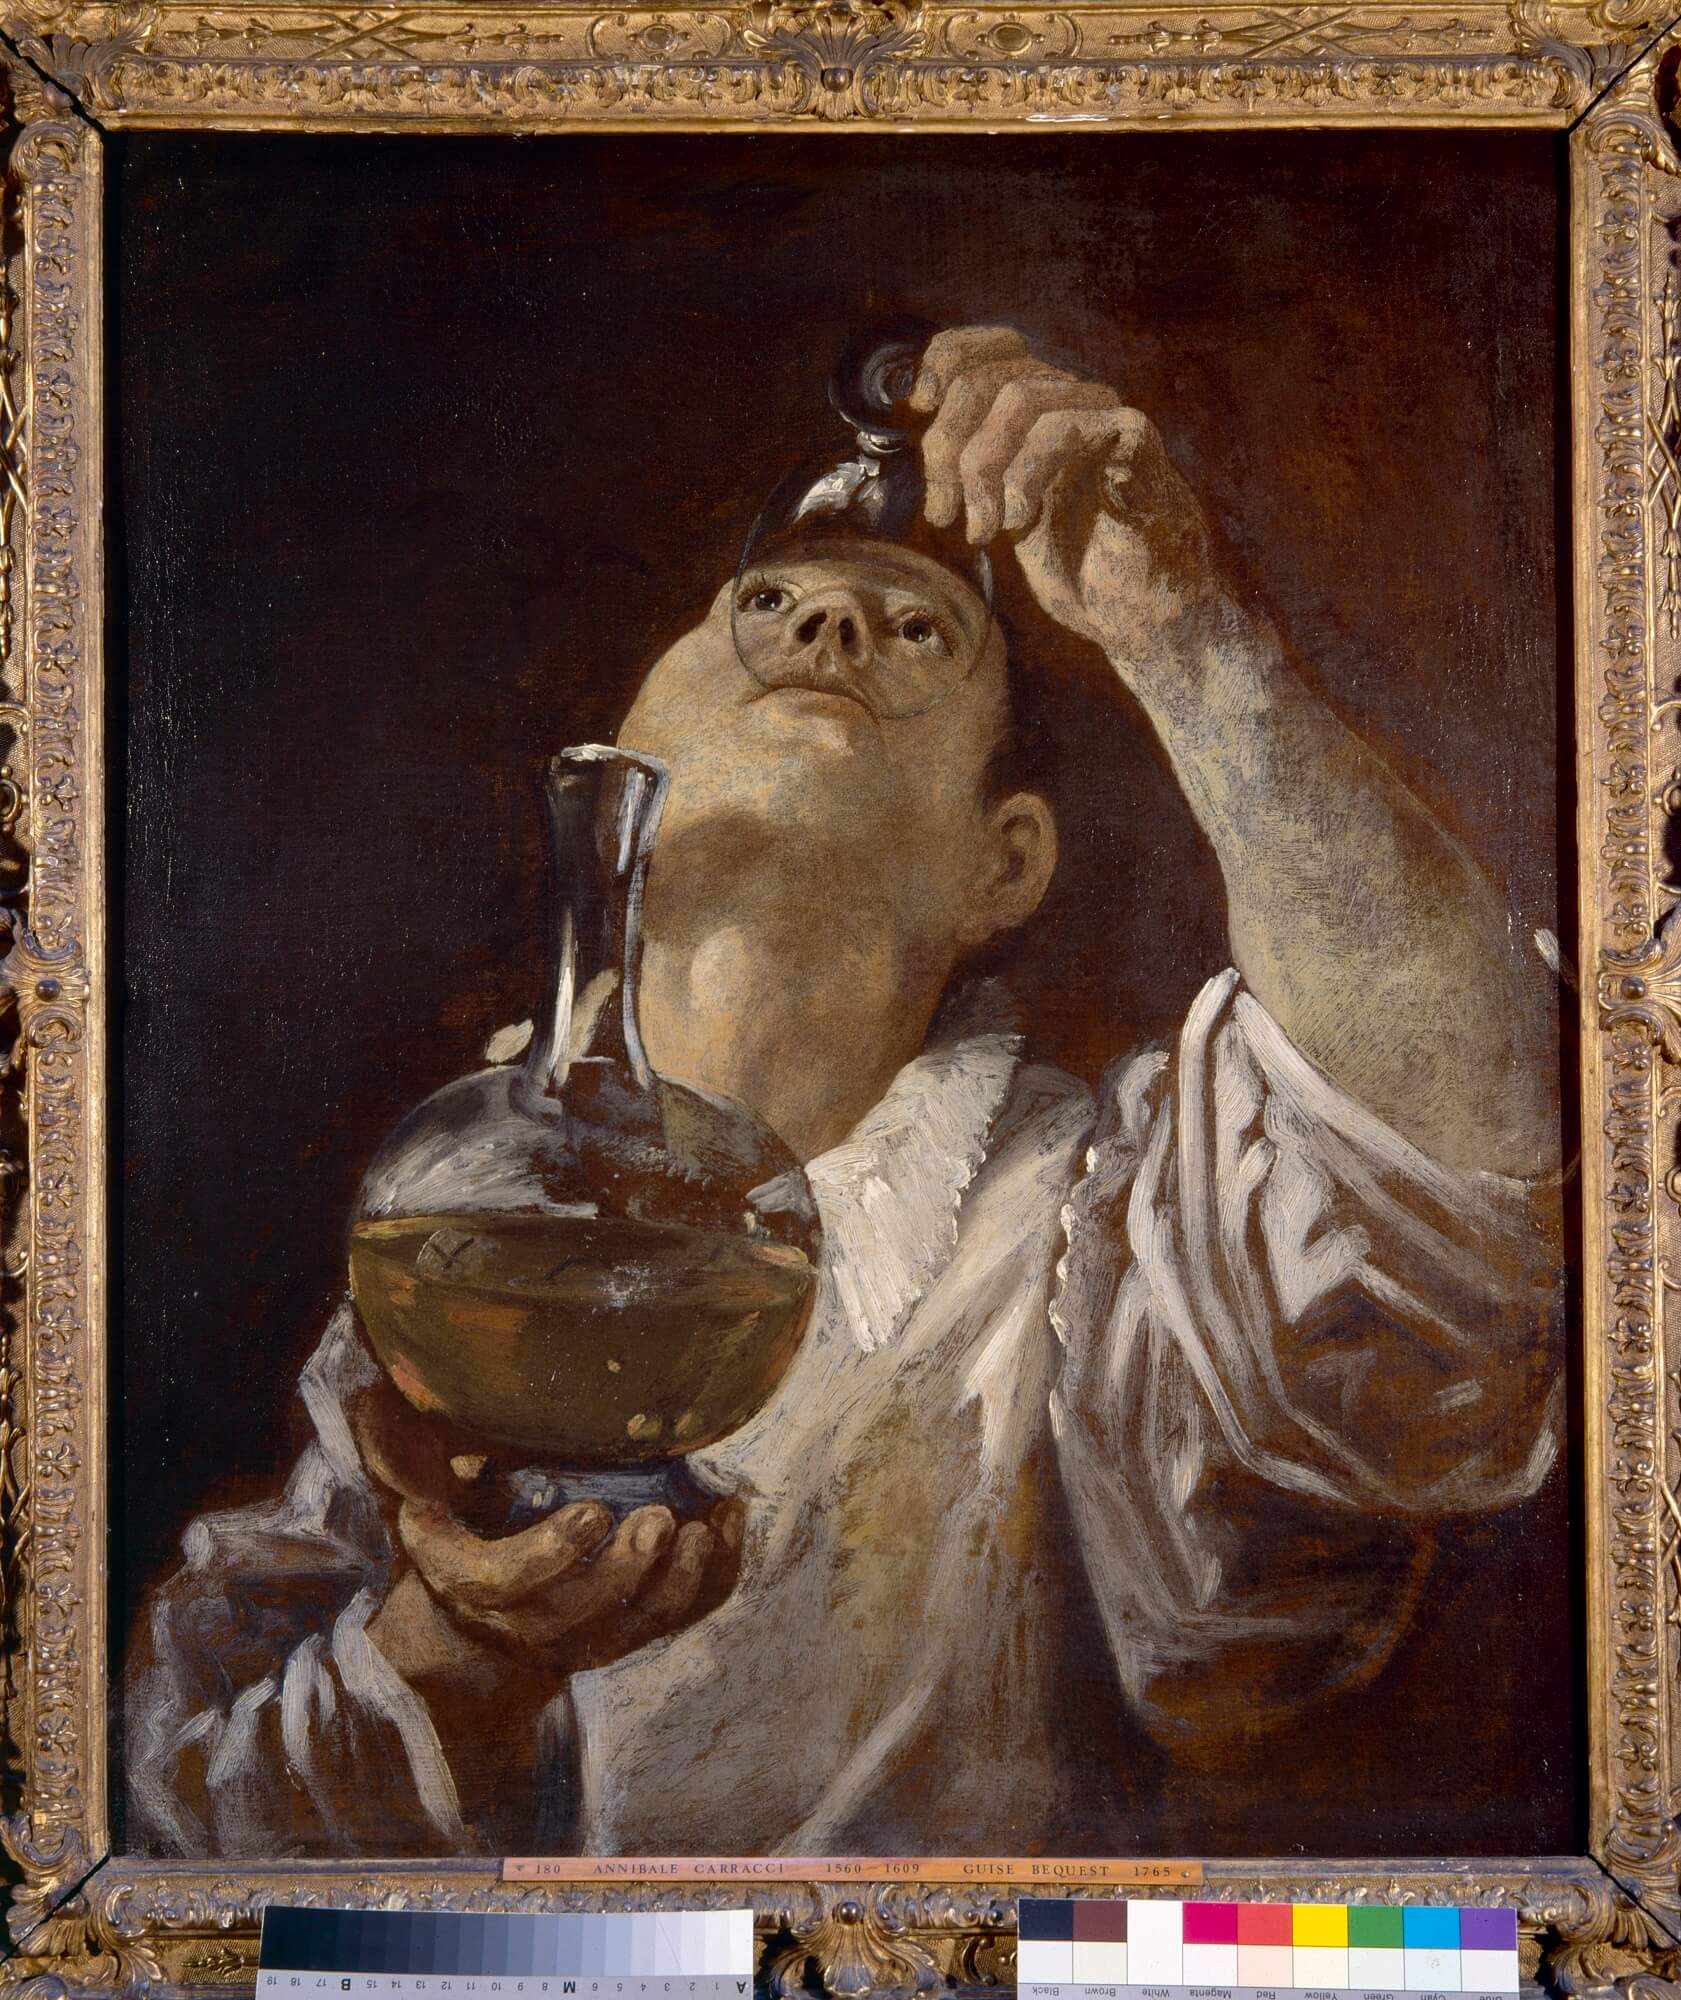 20-03-15-annibale-carracci---a-boy-drinking-c-1580-full-size (1)